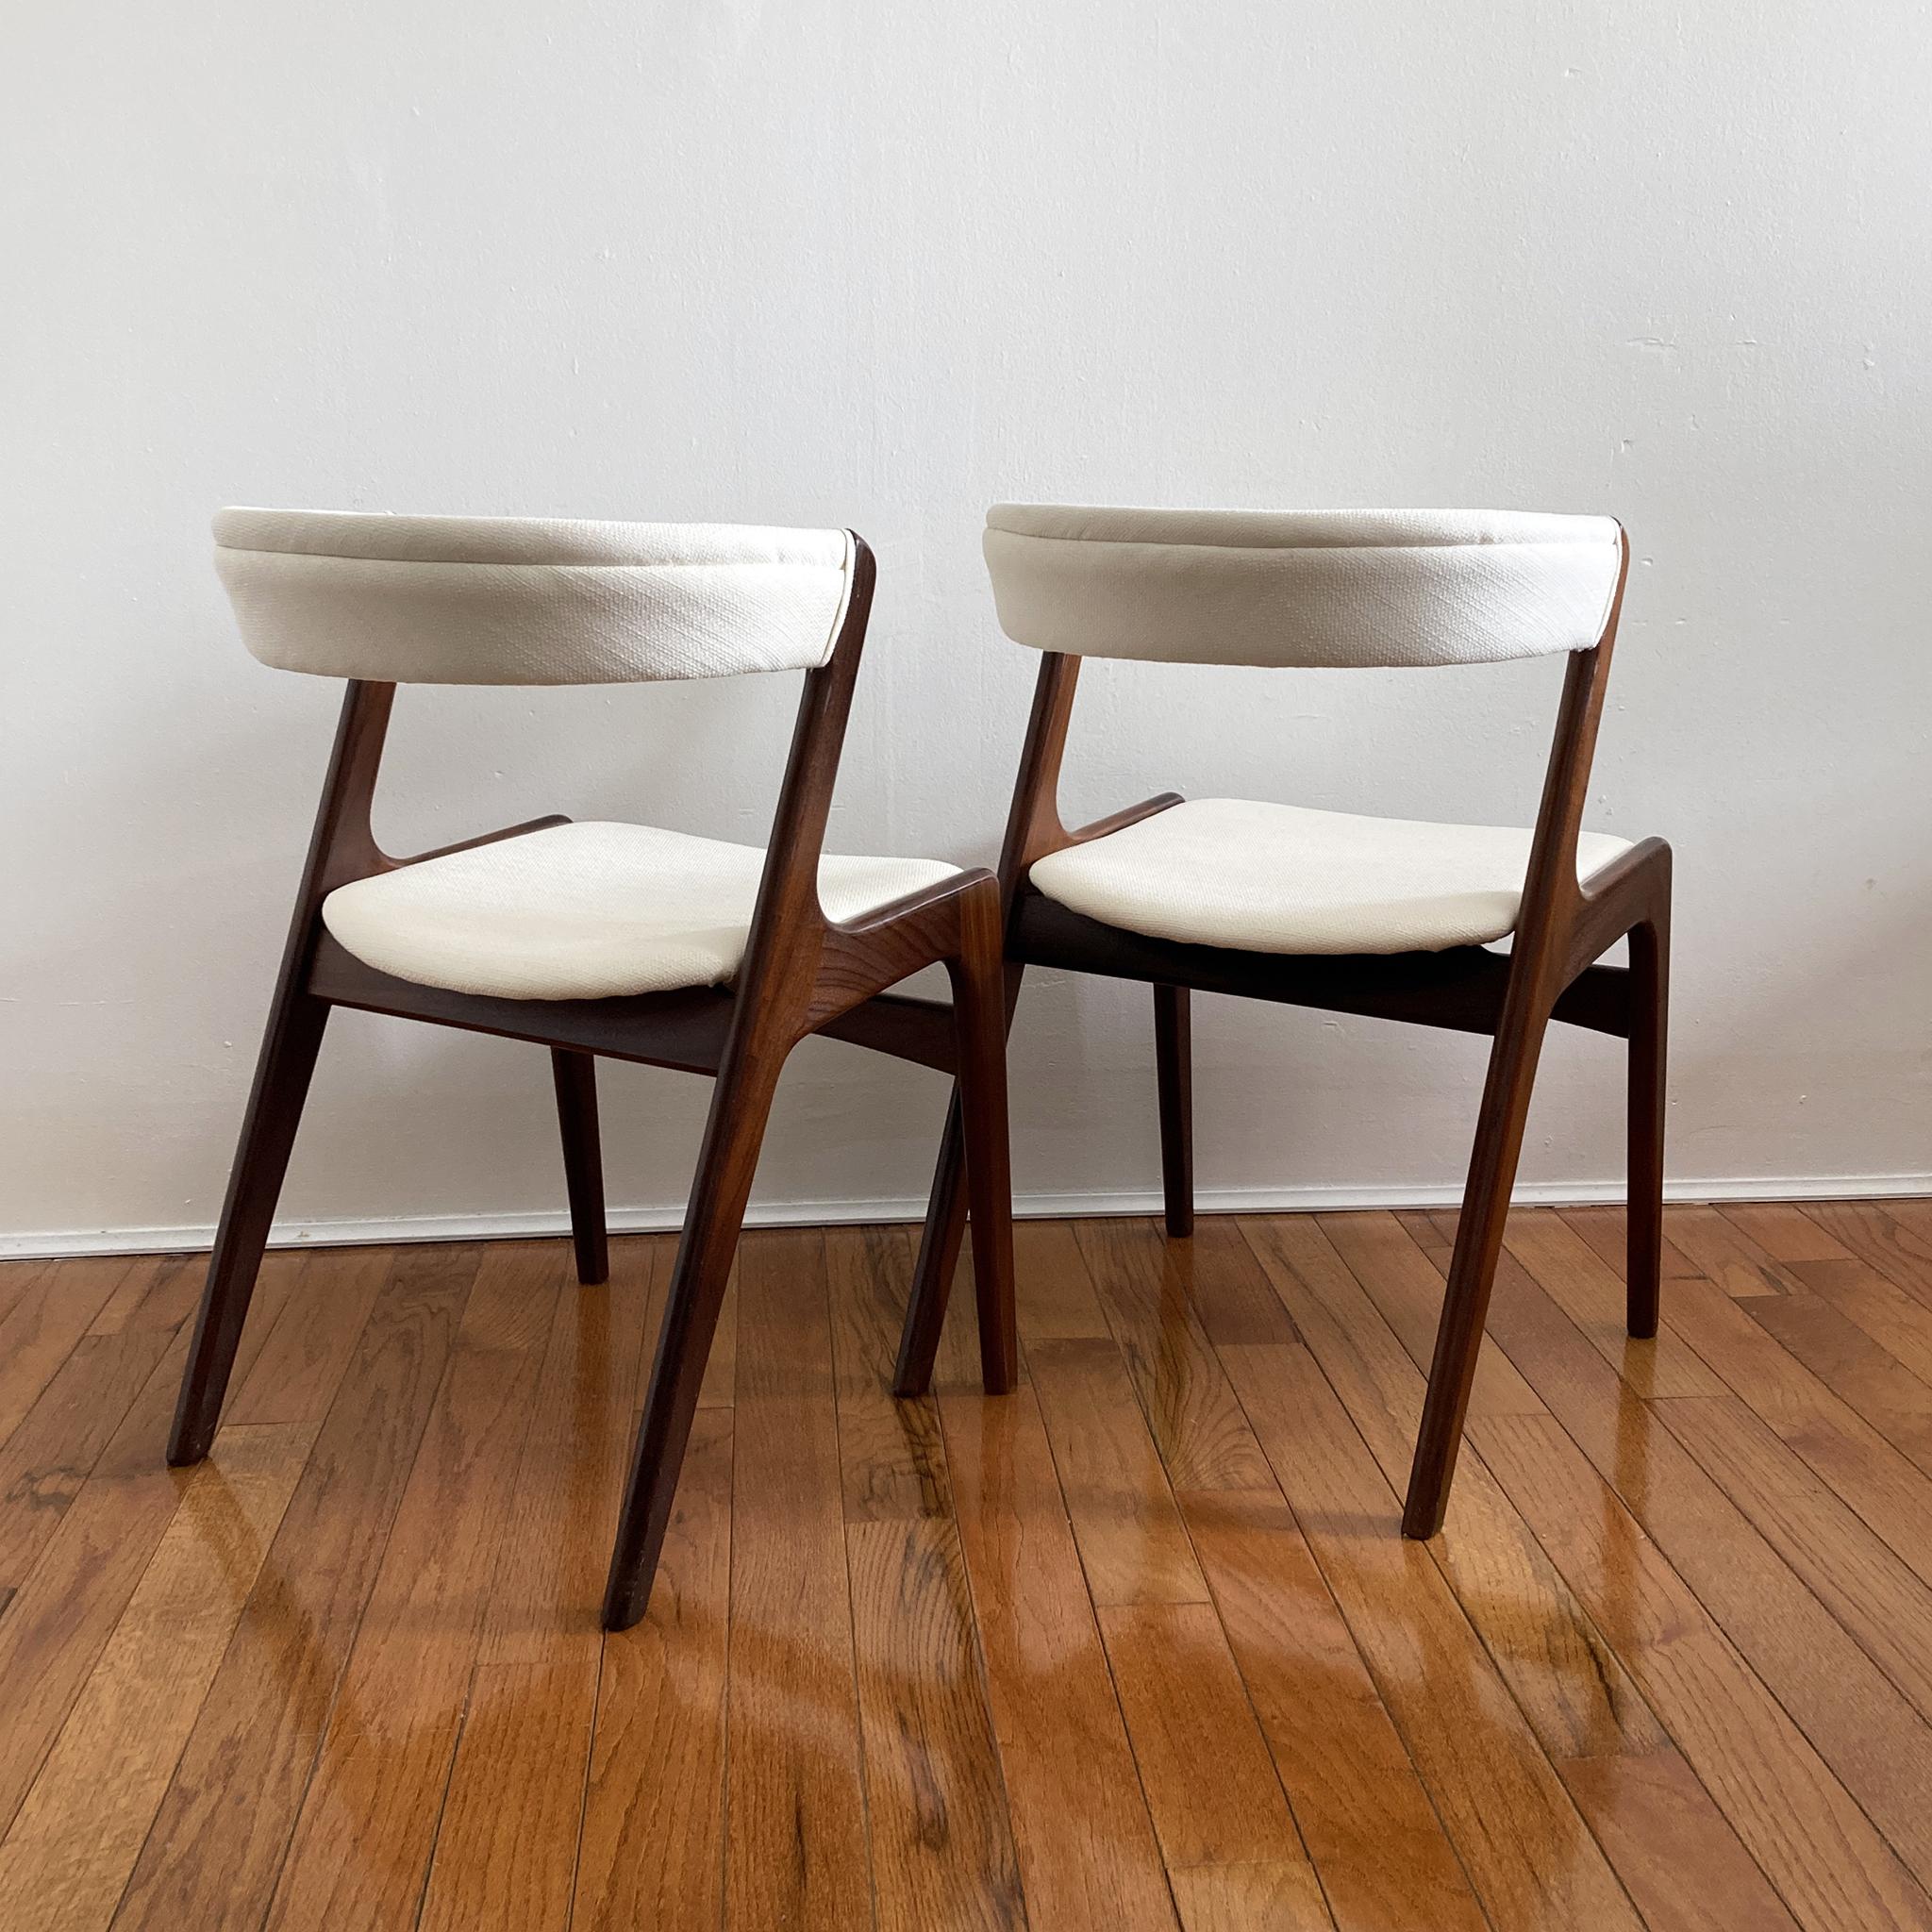 Mid-Century Modern Kai Kristiansen Ivory Tweed Curved Back Teak Chairs, Danish, 1960s, Pair of Two For Sale